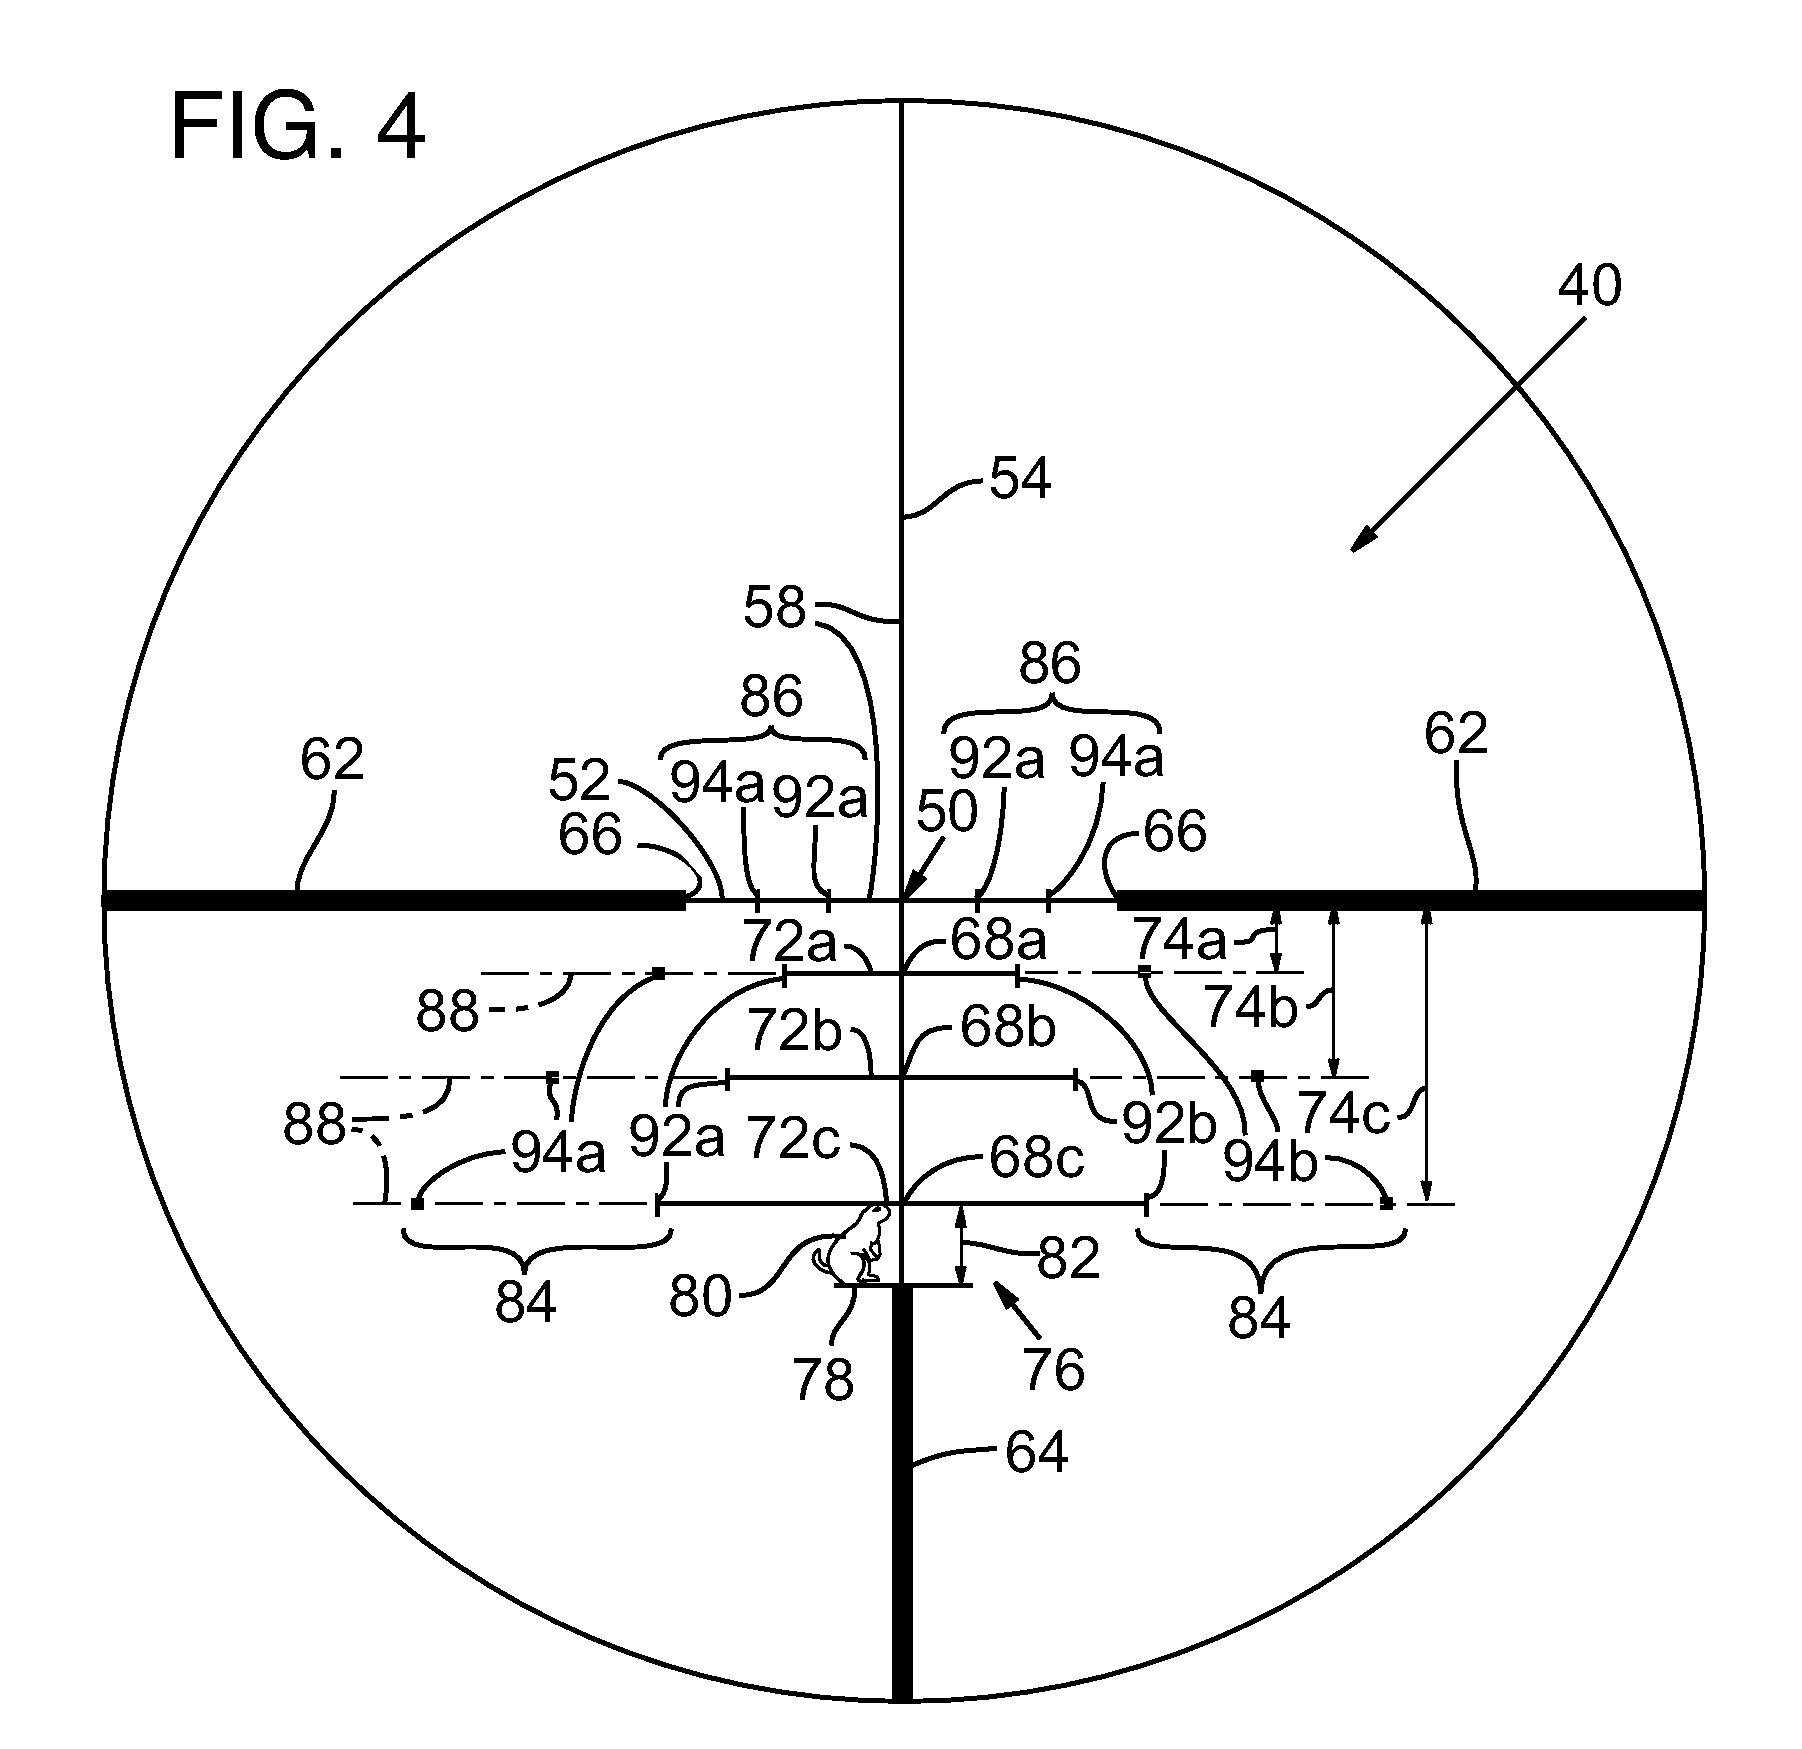 Ballistic reticle and riflescope for projectile weapon aiming system